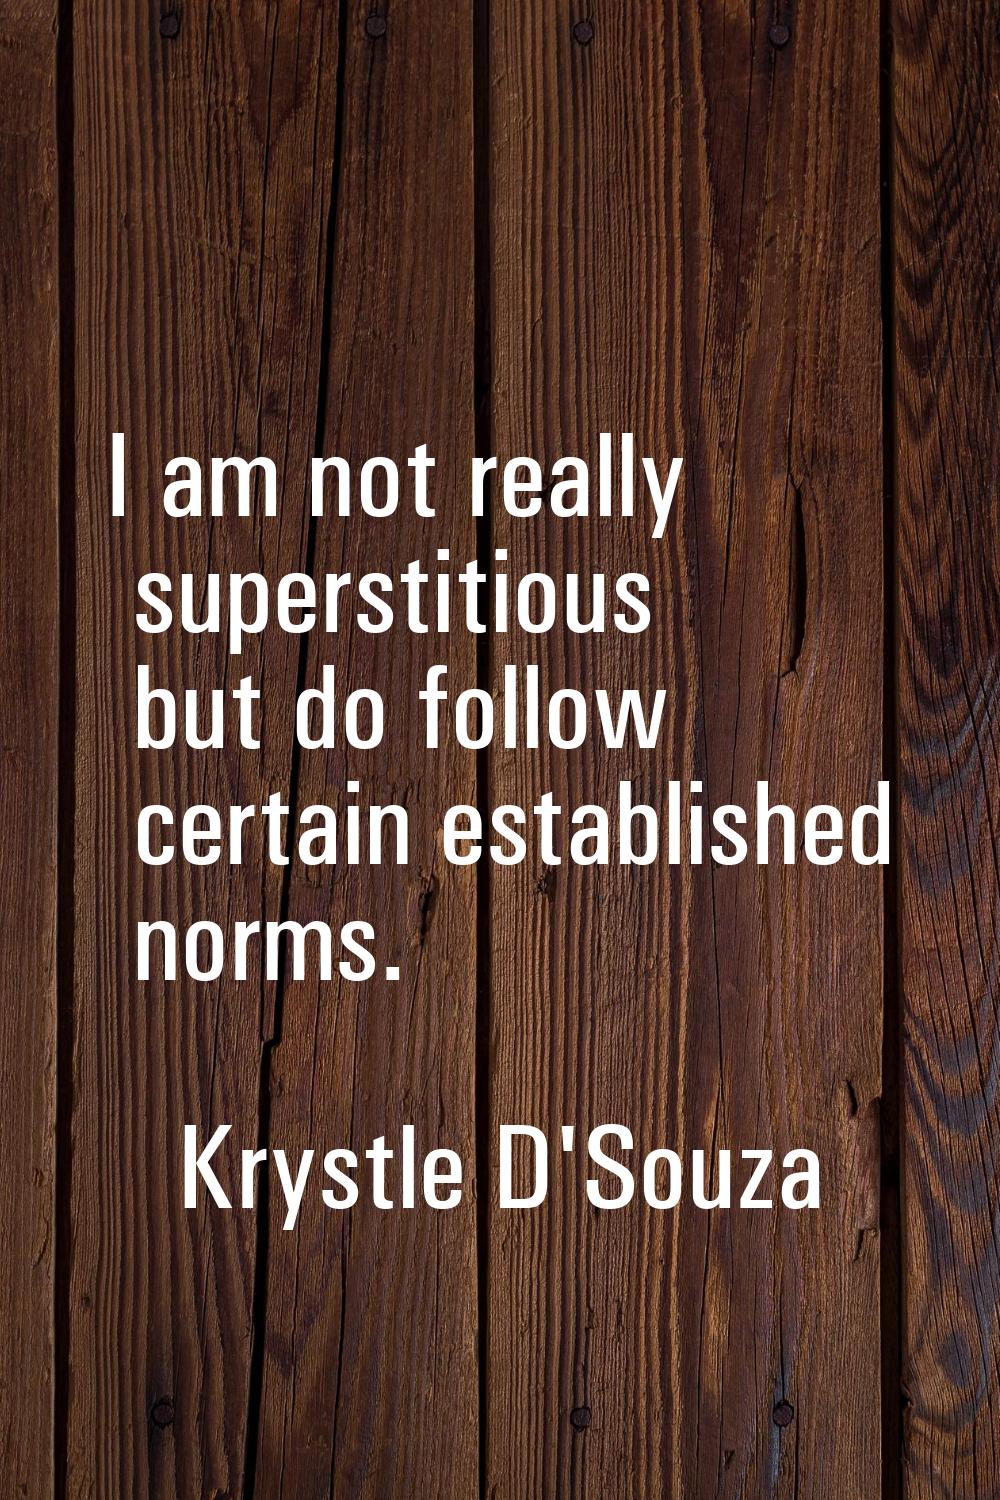 I am not really superstitious but do follow certain established norms.